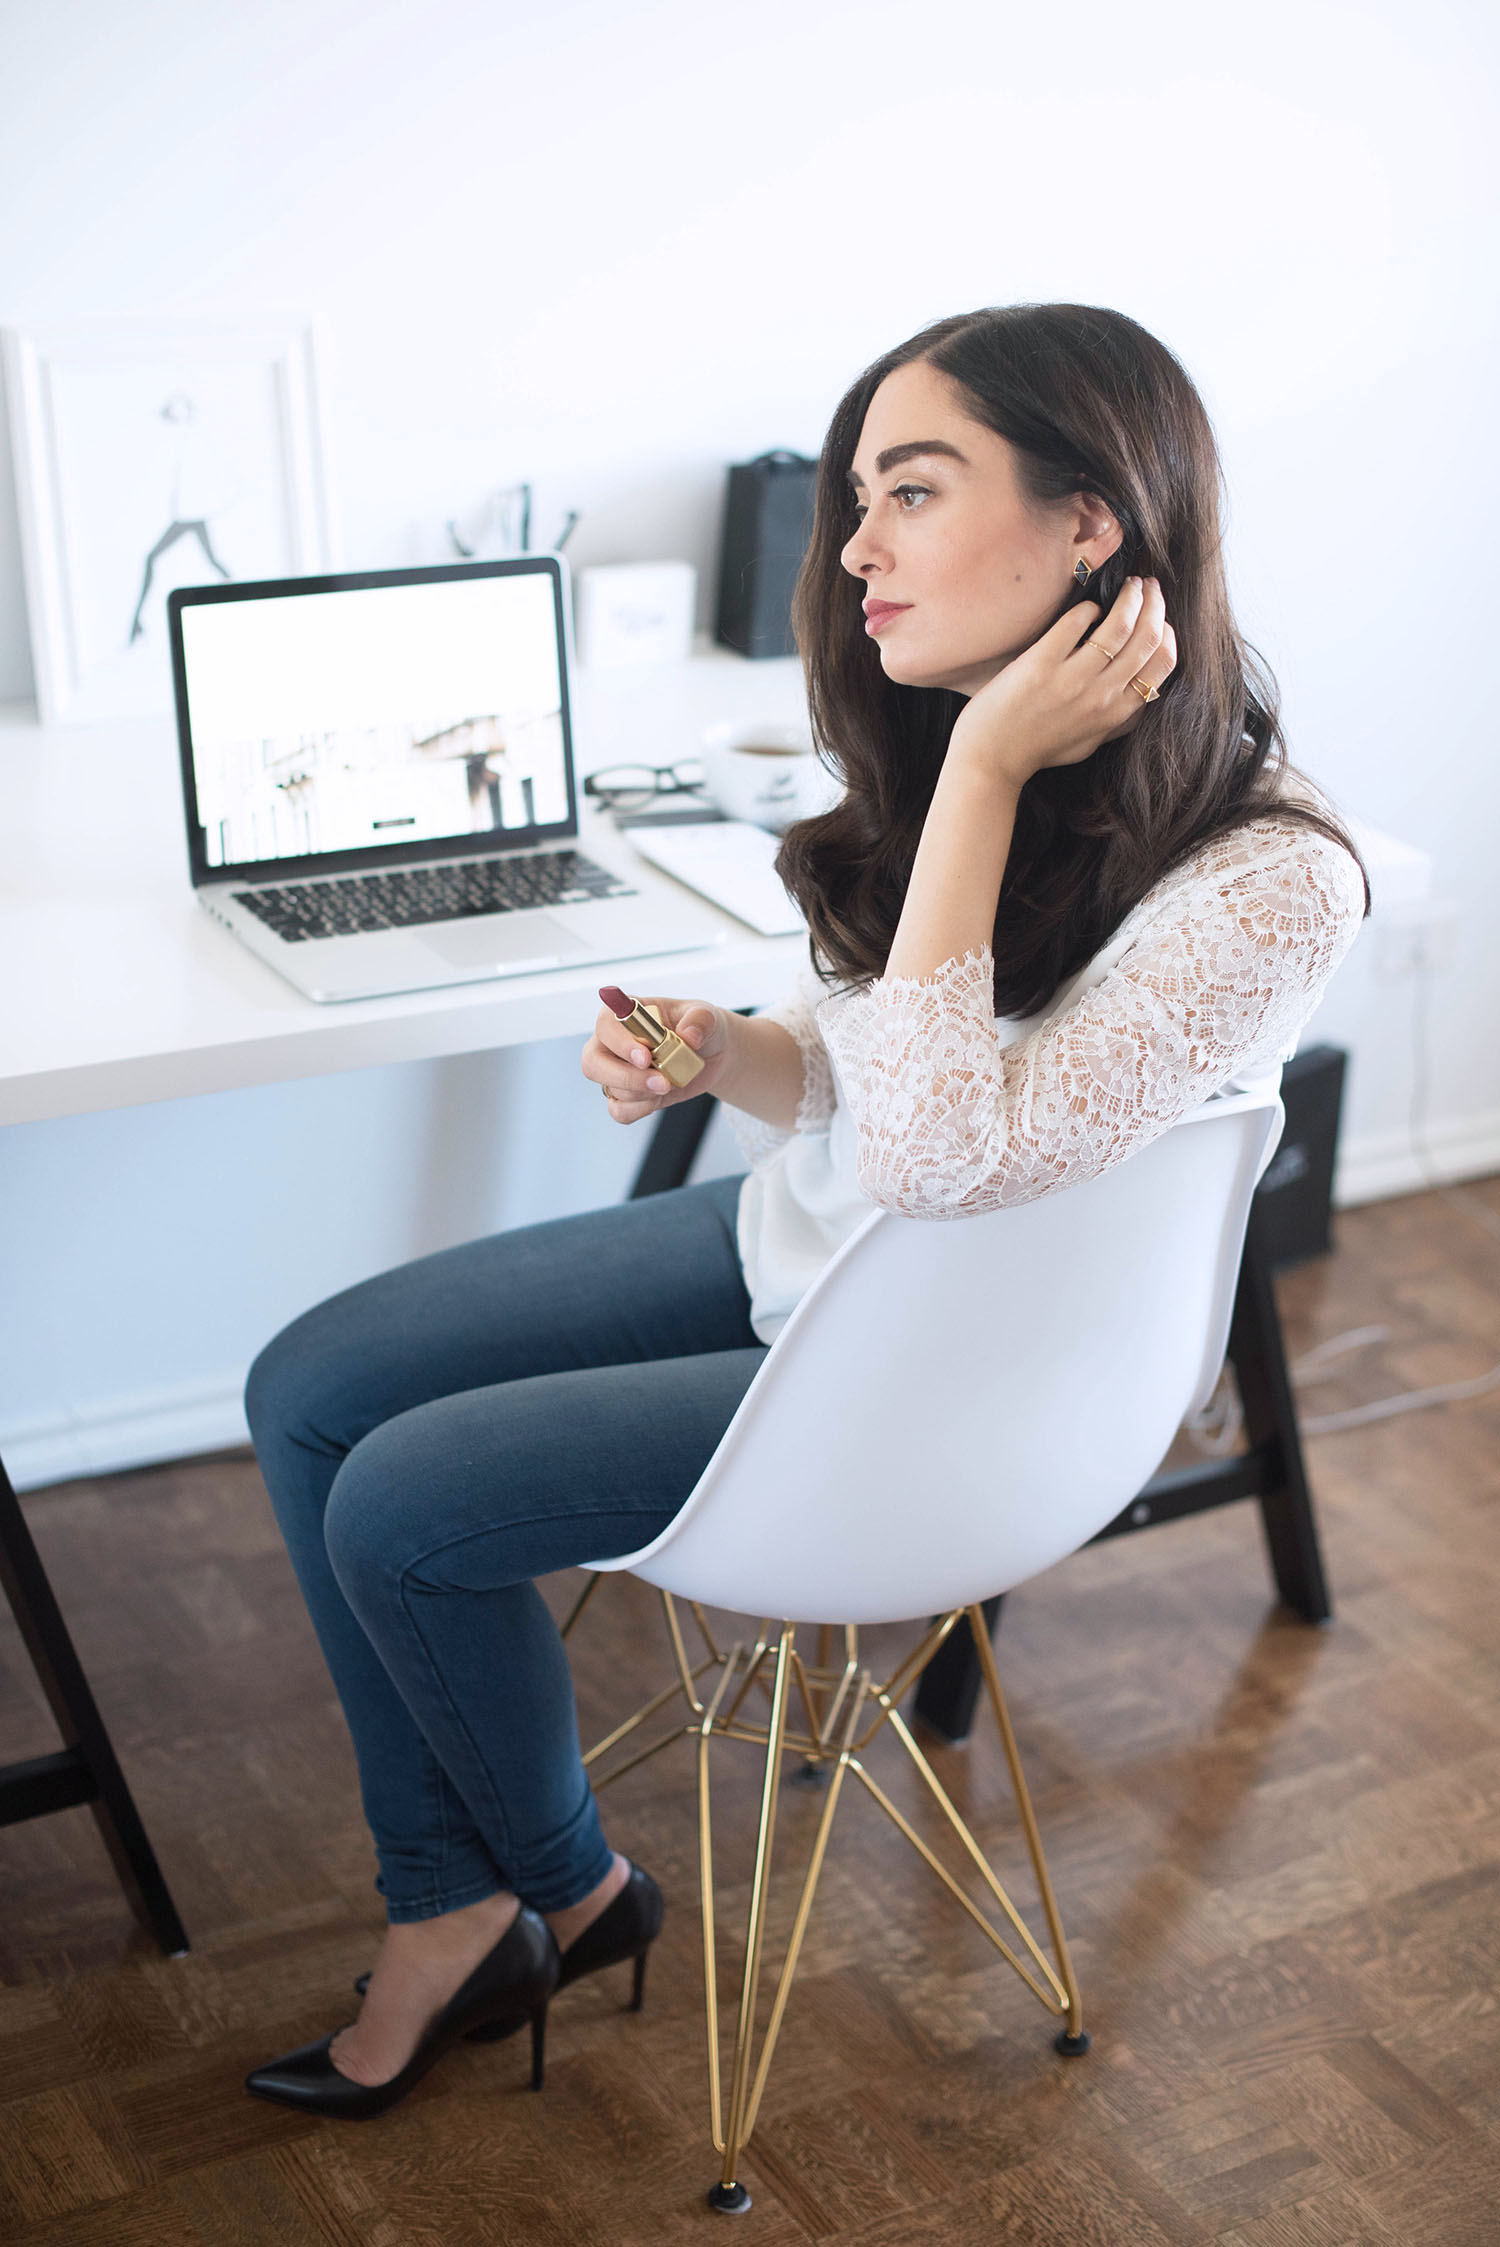 Fashion blogger Cee Fardoe of Coco & Vera sits in her home office wearing a white Sezane blouse and Mott & Bow blue jeans